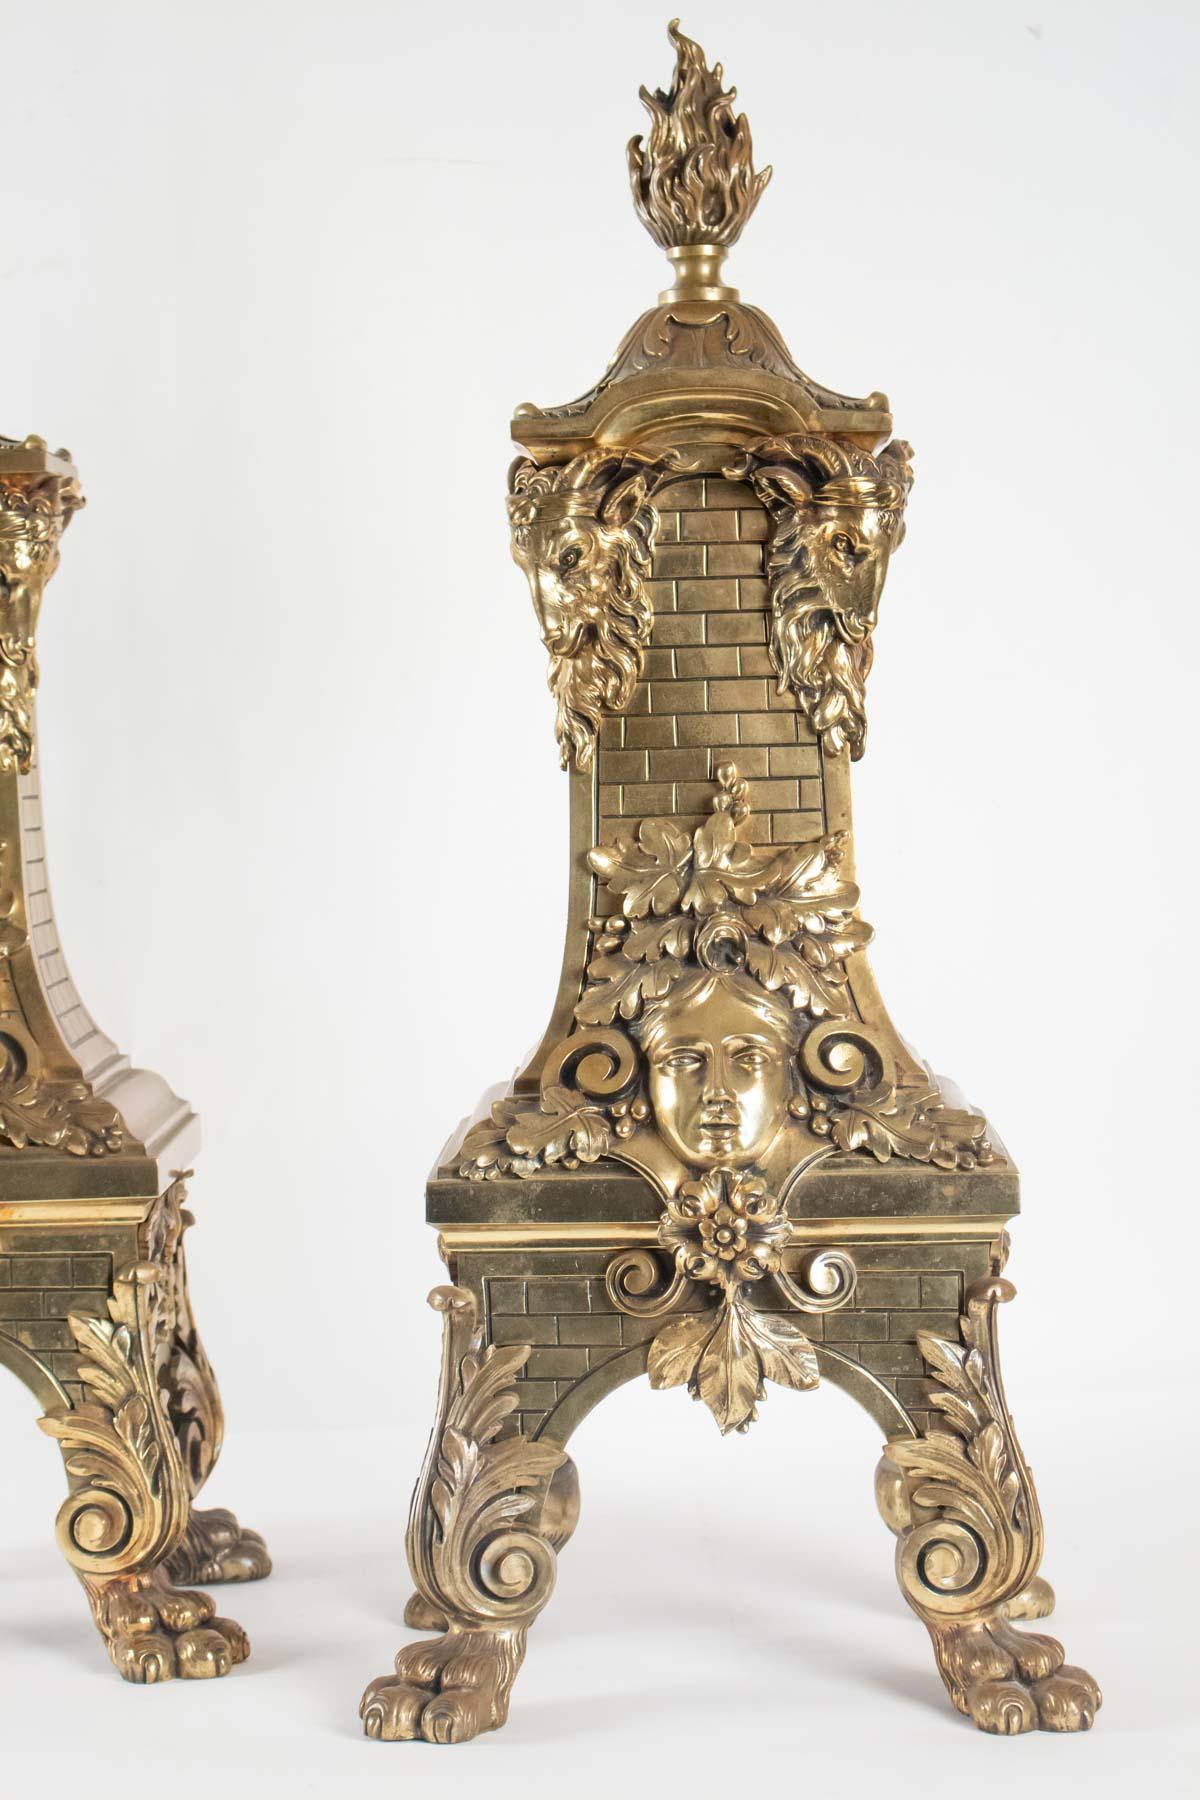 Pair of spectacular bronze fireplaces Napoleon III style of the early 20th century.
Measures: H 81 cm, W 35 cm, W 30 cm.